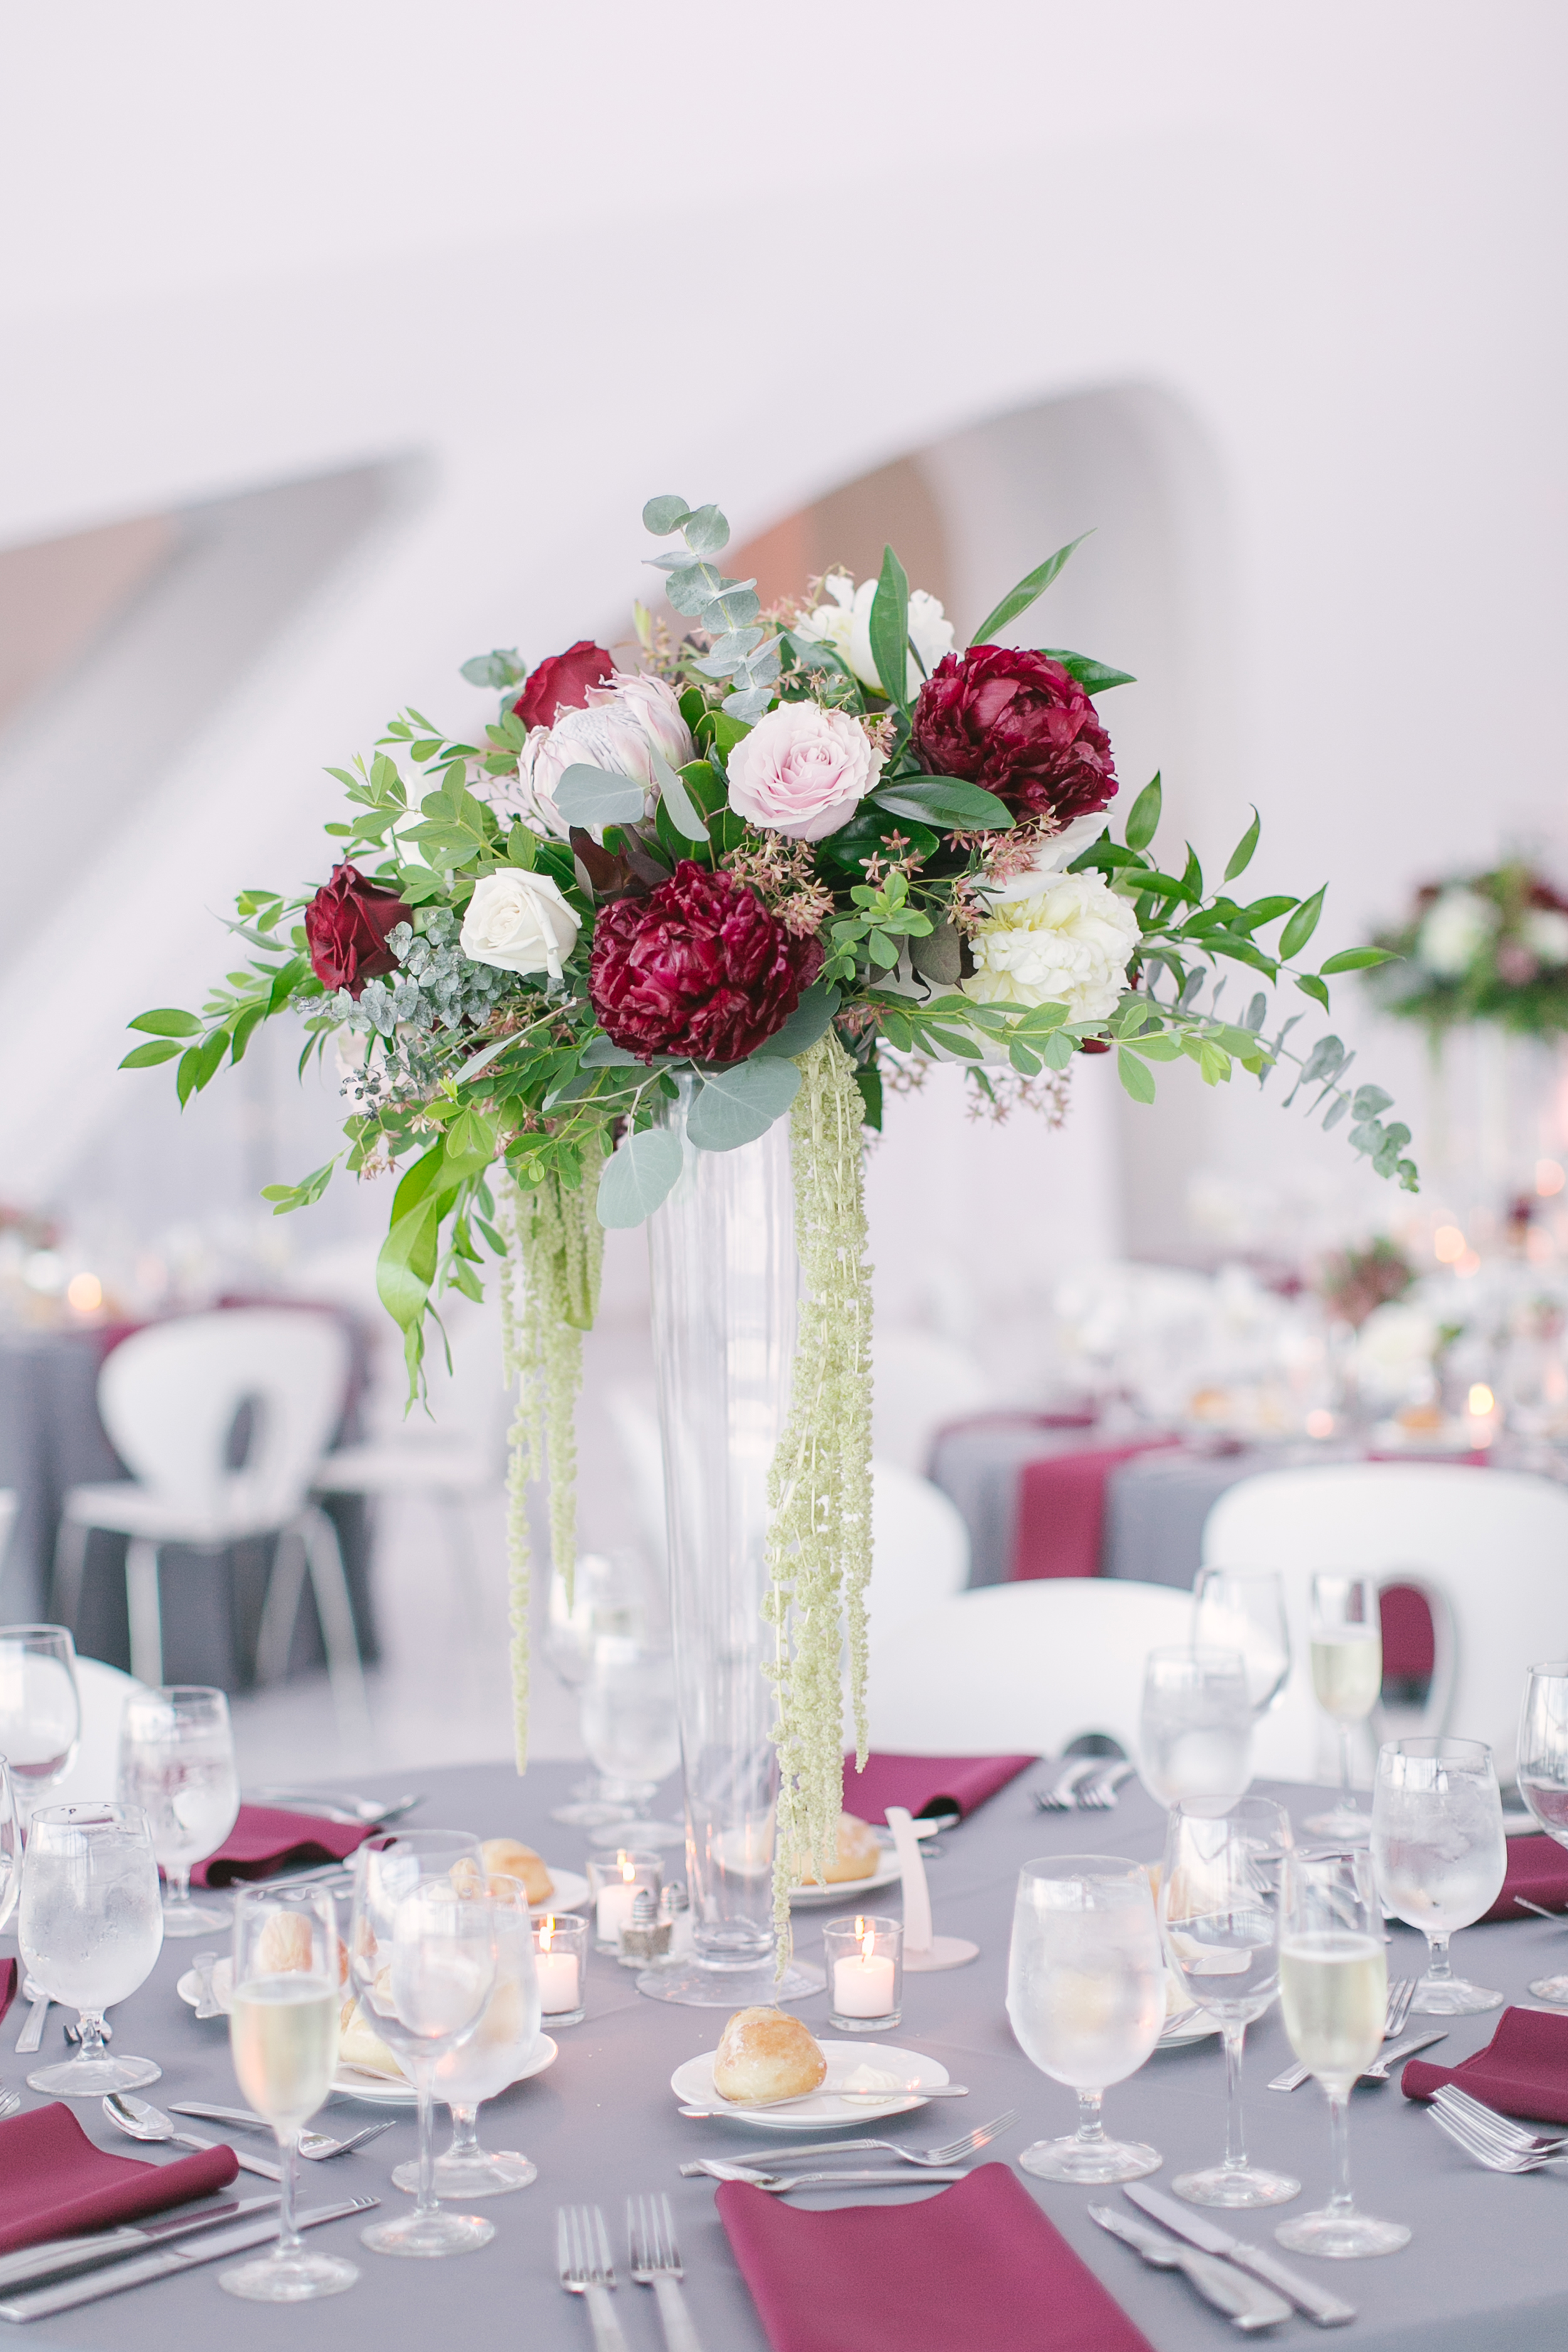 29 Tall Centerpieces That Will Take Your Reception Tables to New